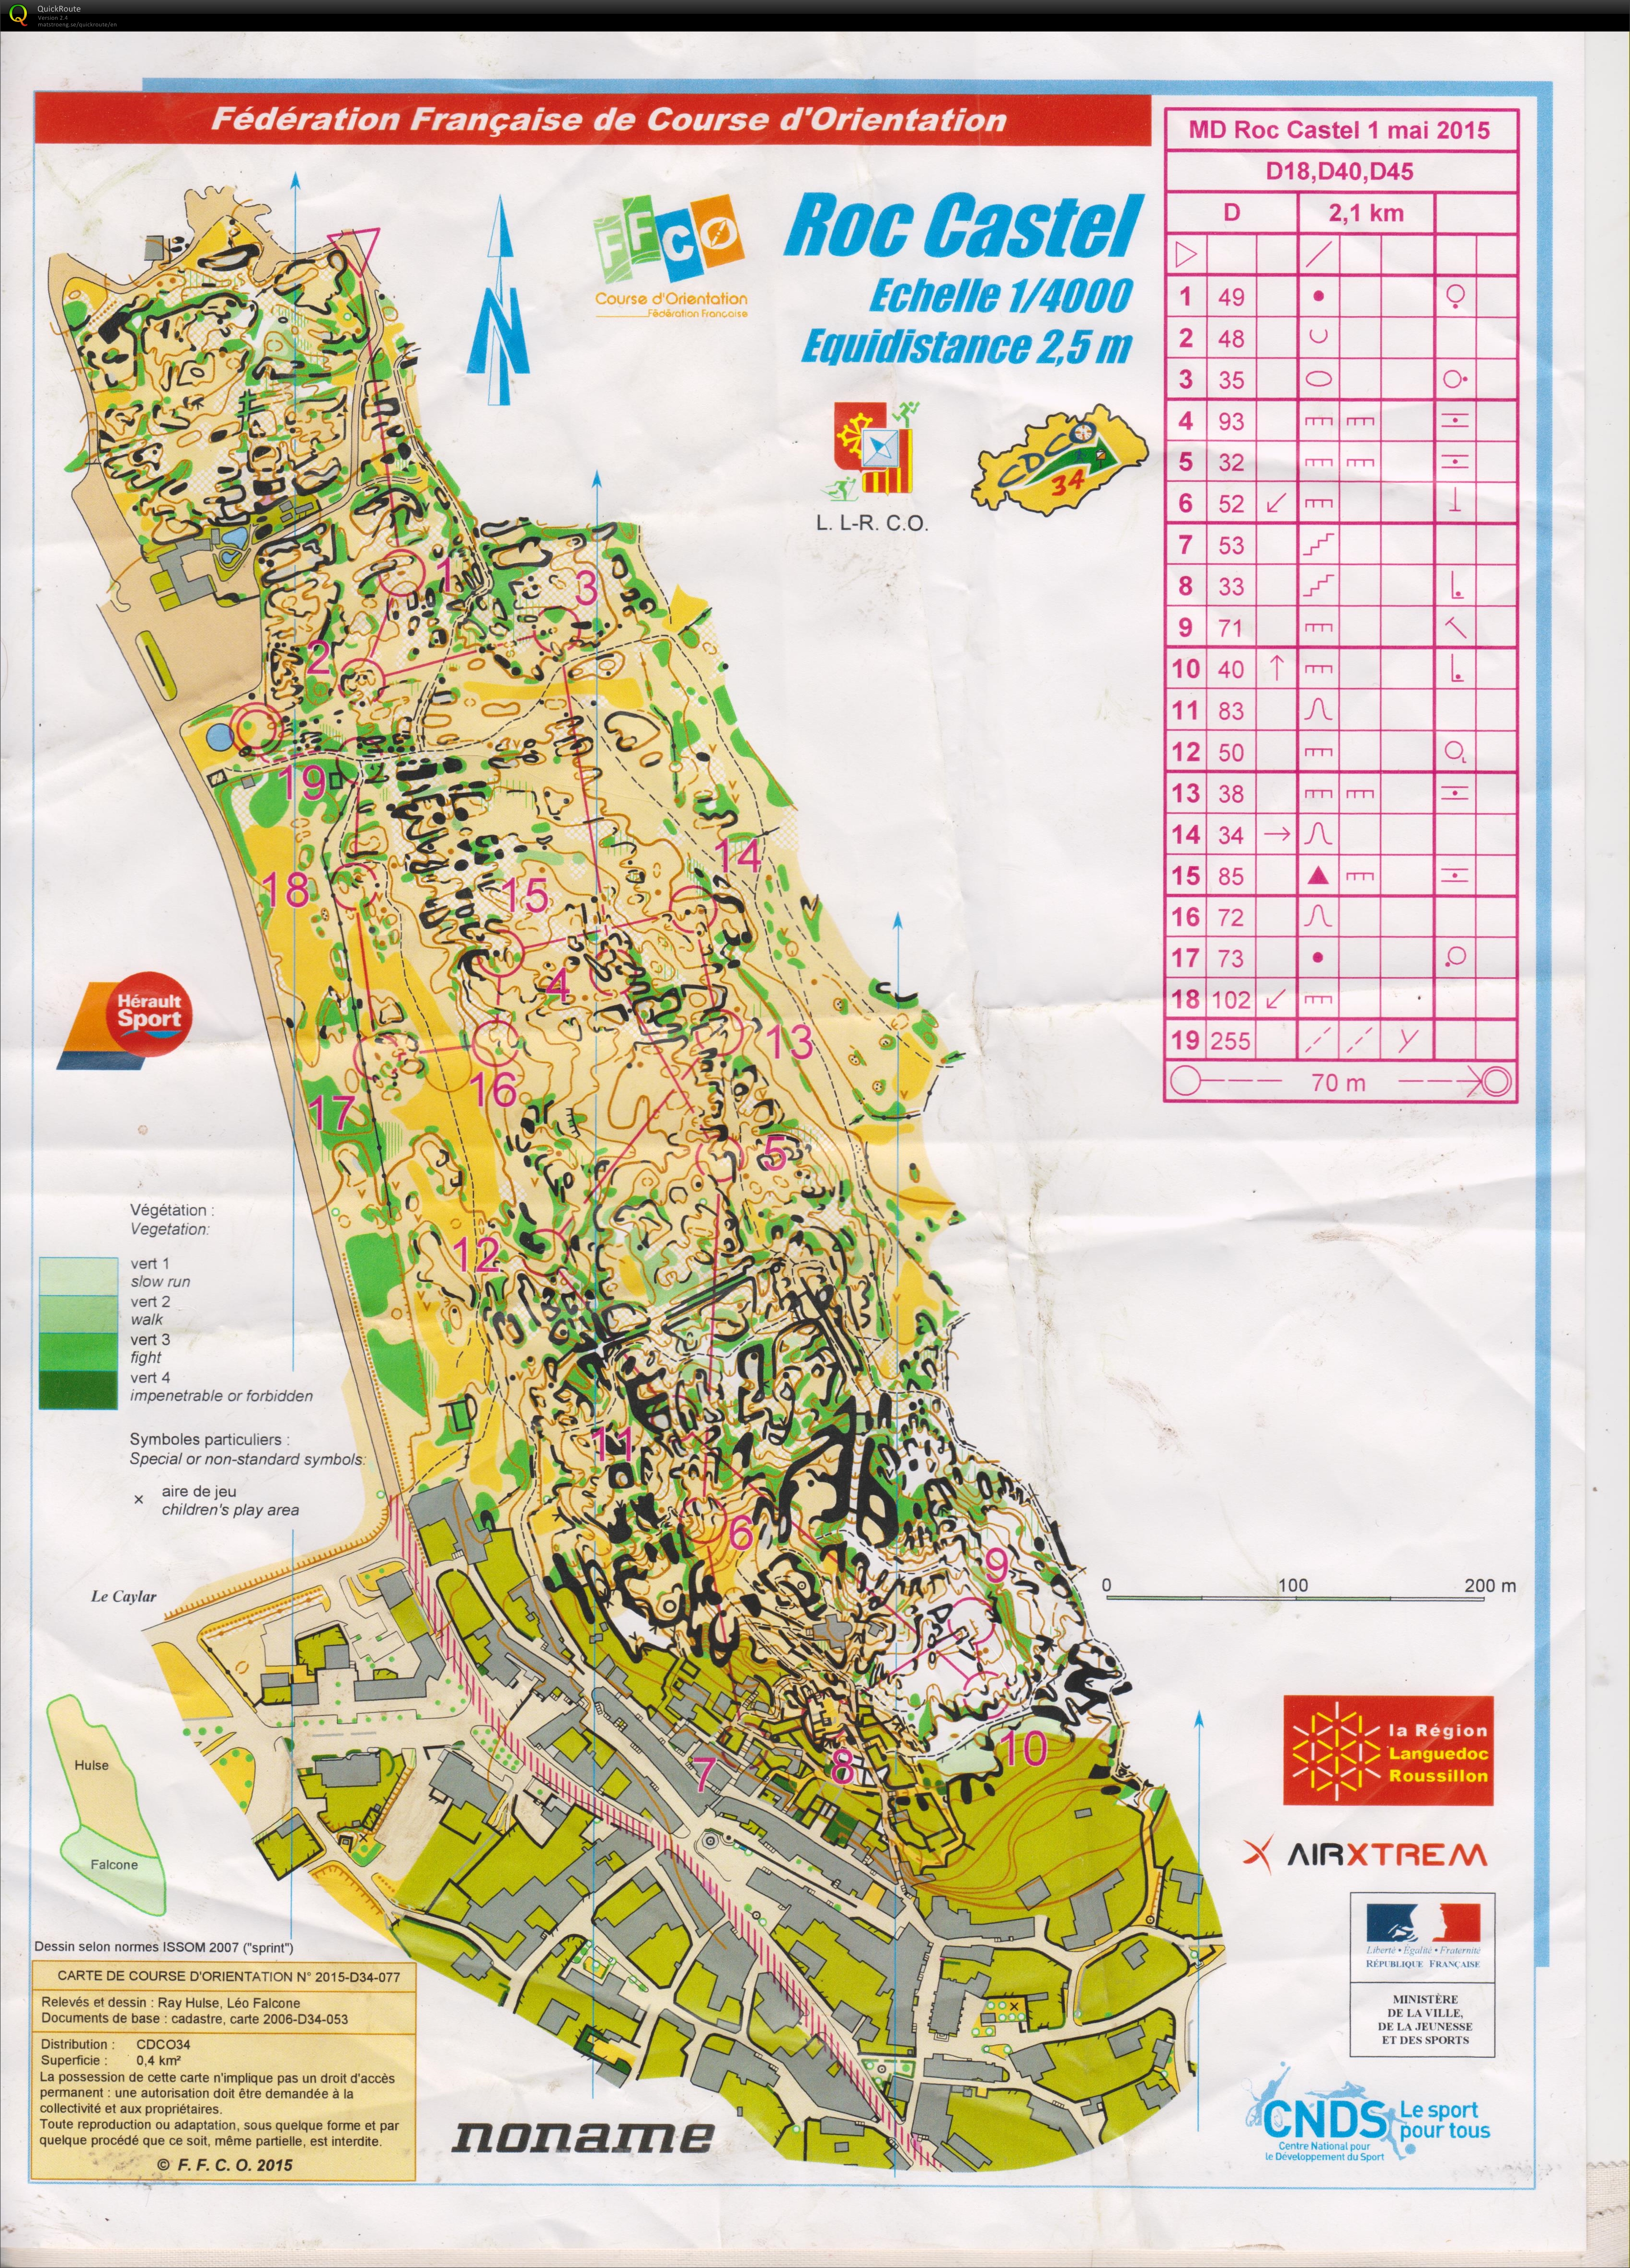 Nationale SO Larzac D18 - Day 1 - Le Caylar (2015-05-01)